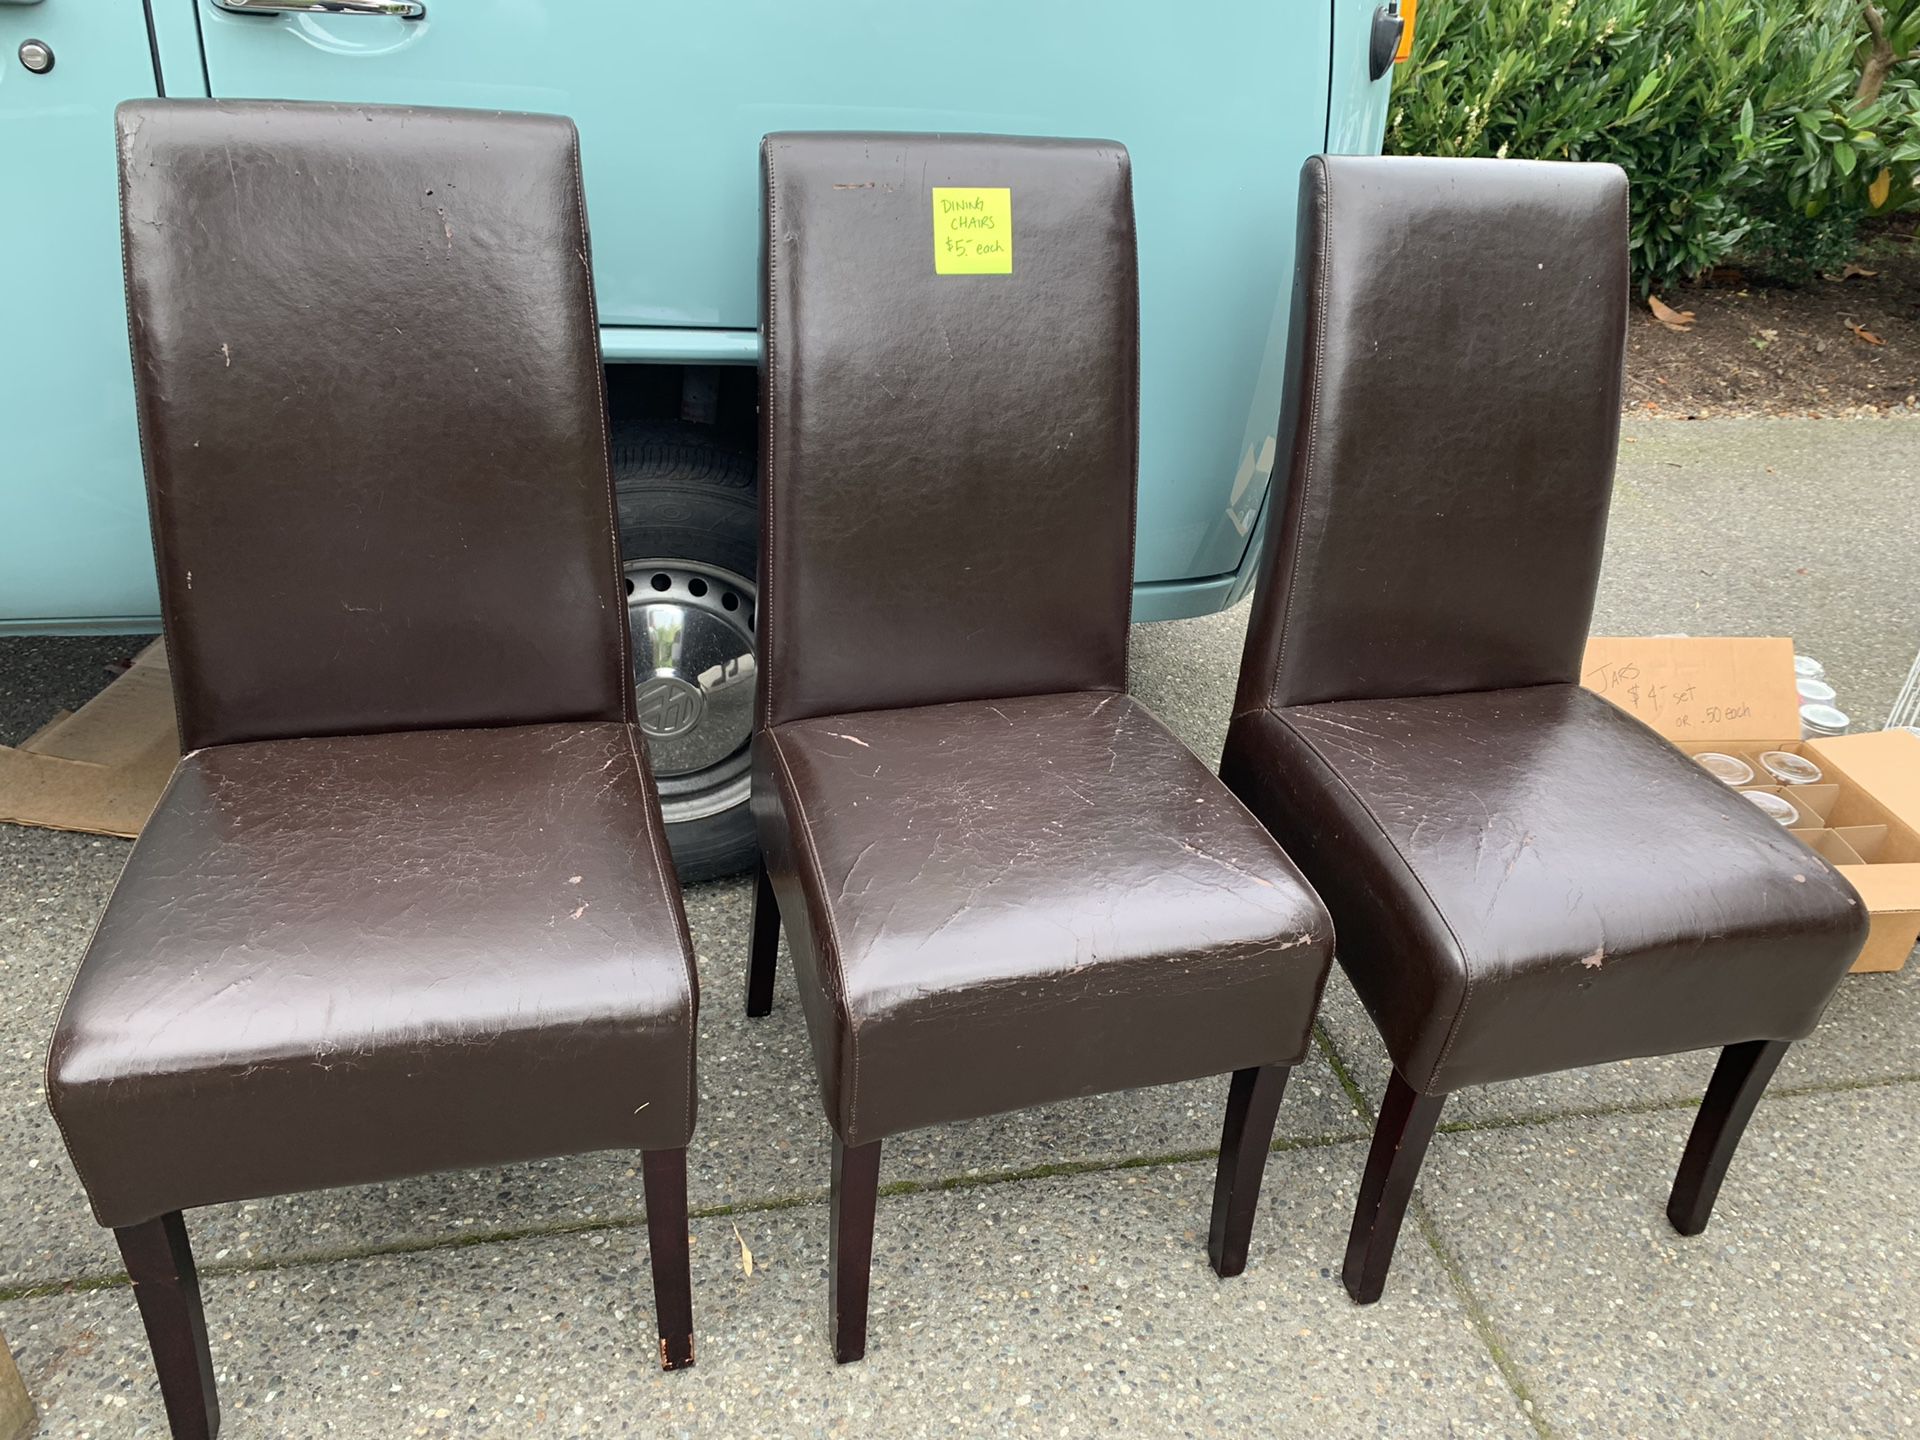 Dining chairs-free as is